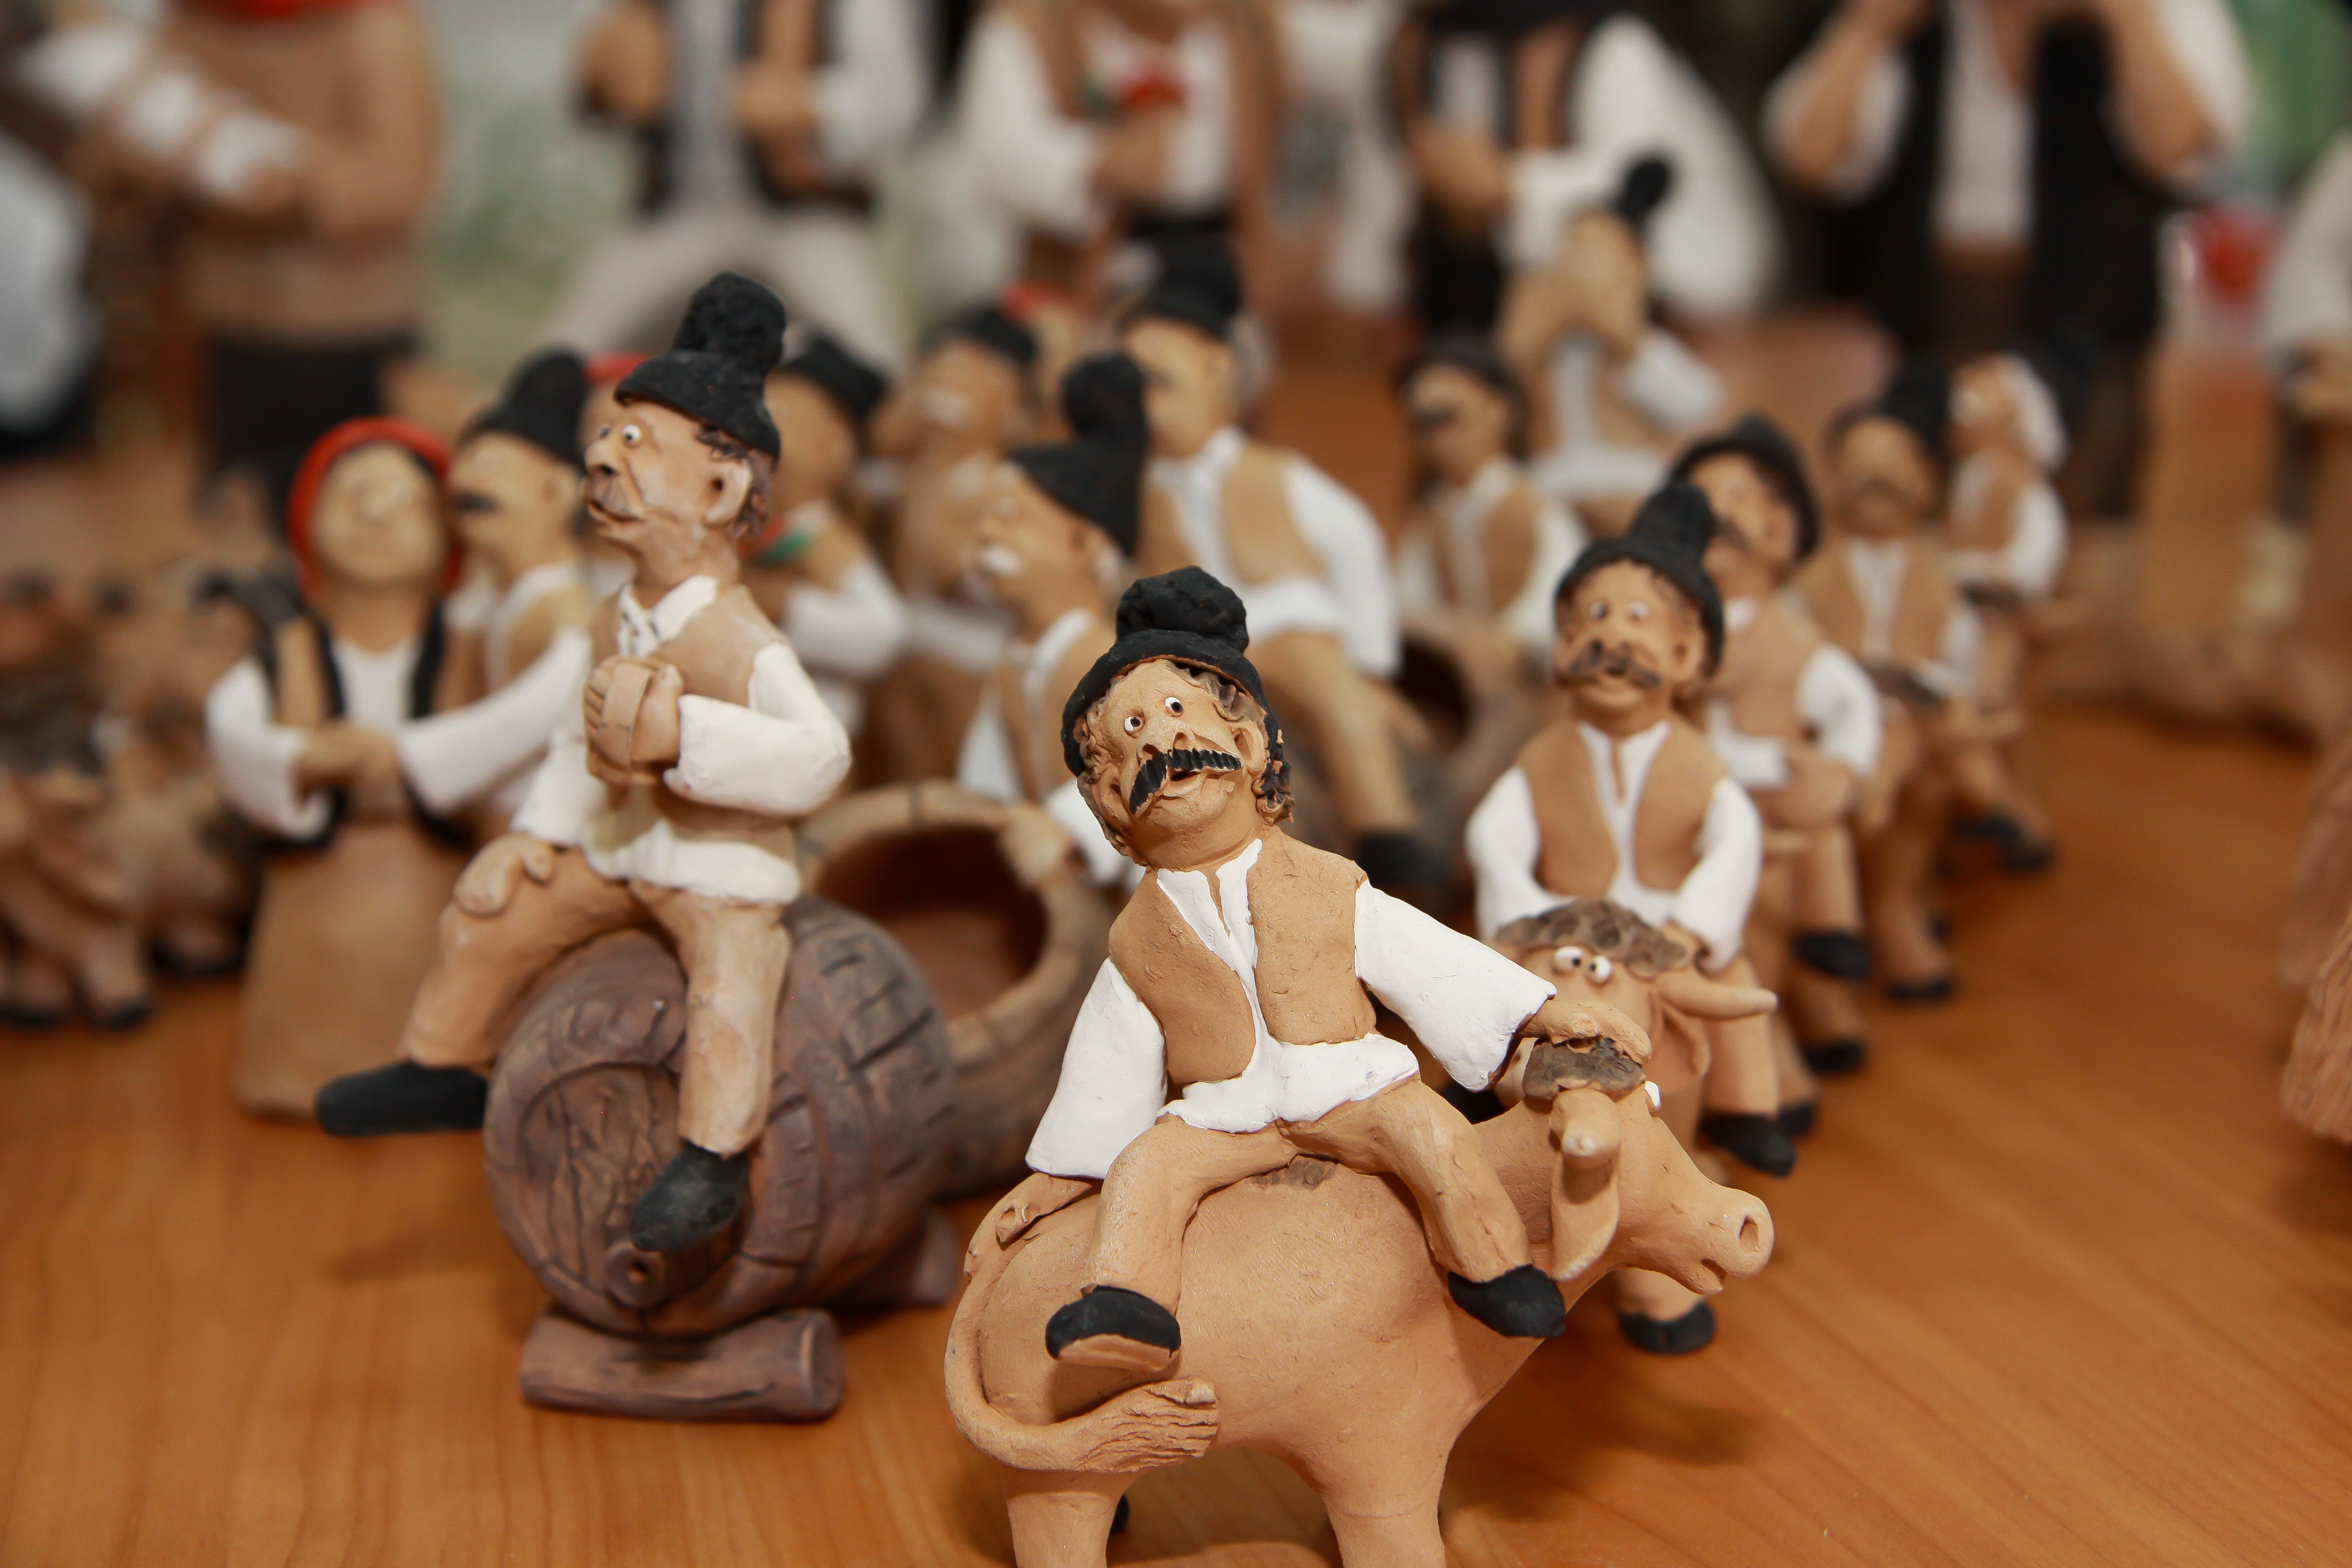 man in white shirt riding cow figurines lot